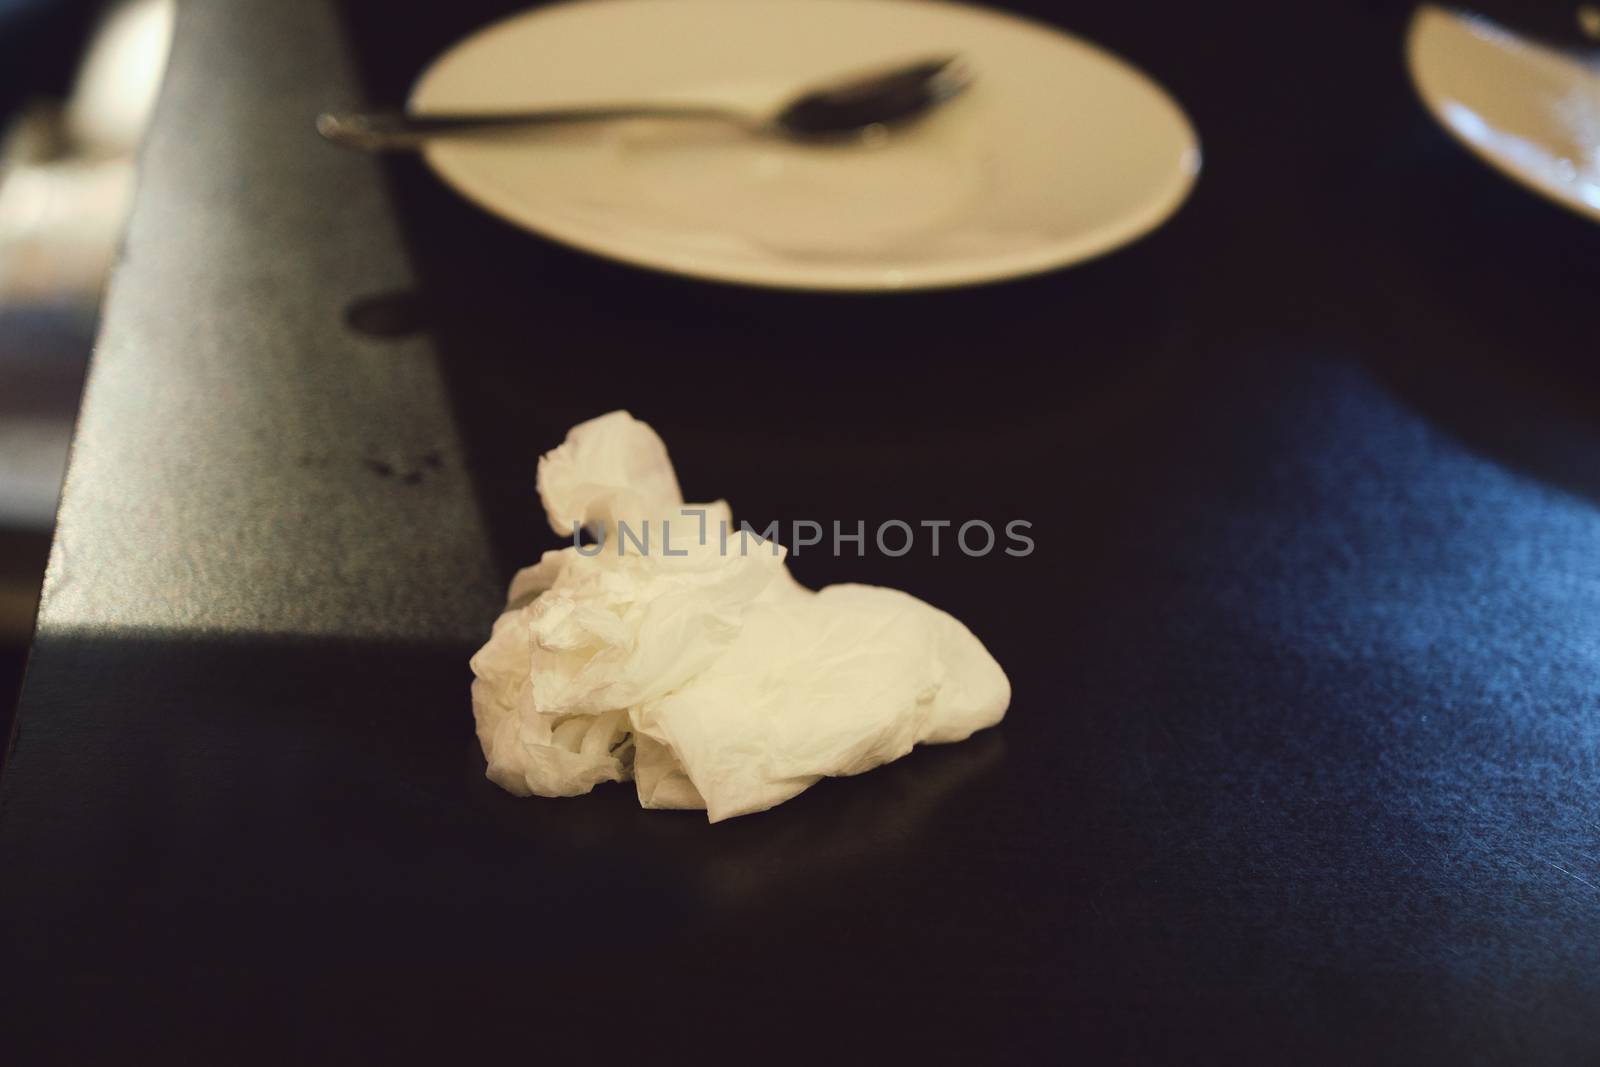 Crumpled Tissue Paper Texture after use for cold and flu season or cleaning concept, placed on wooden table, closeup with blurred background by peerapixs